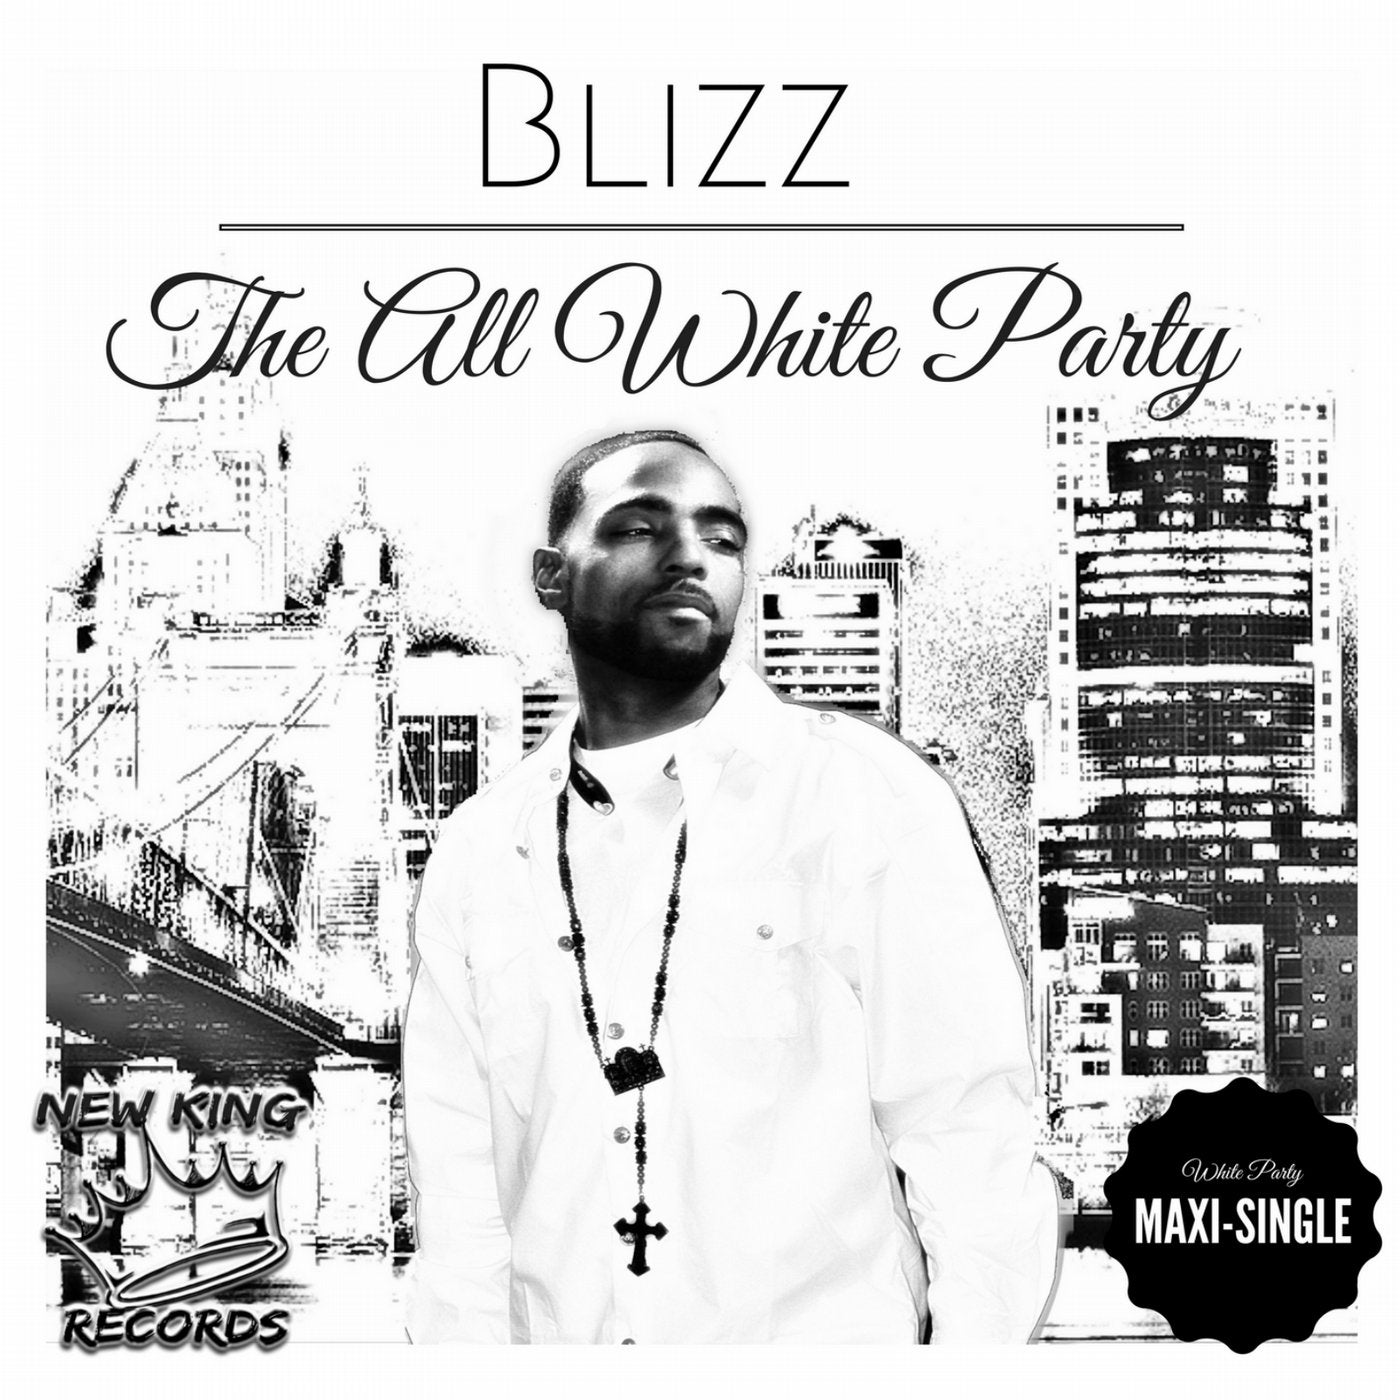 The All White Party